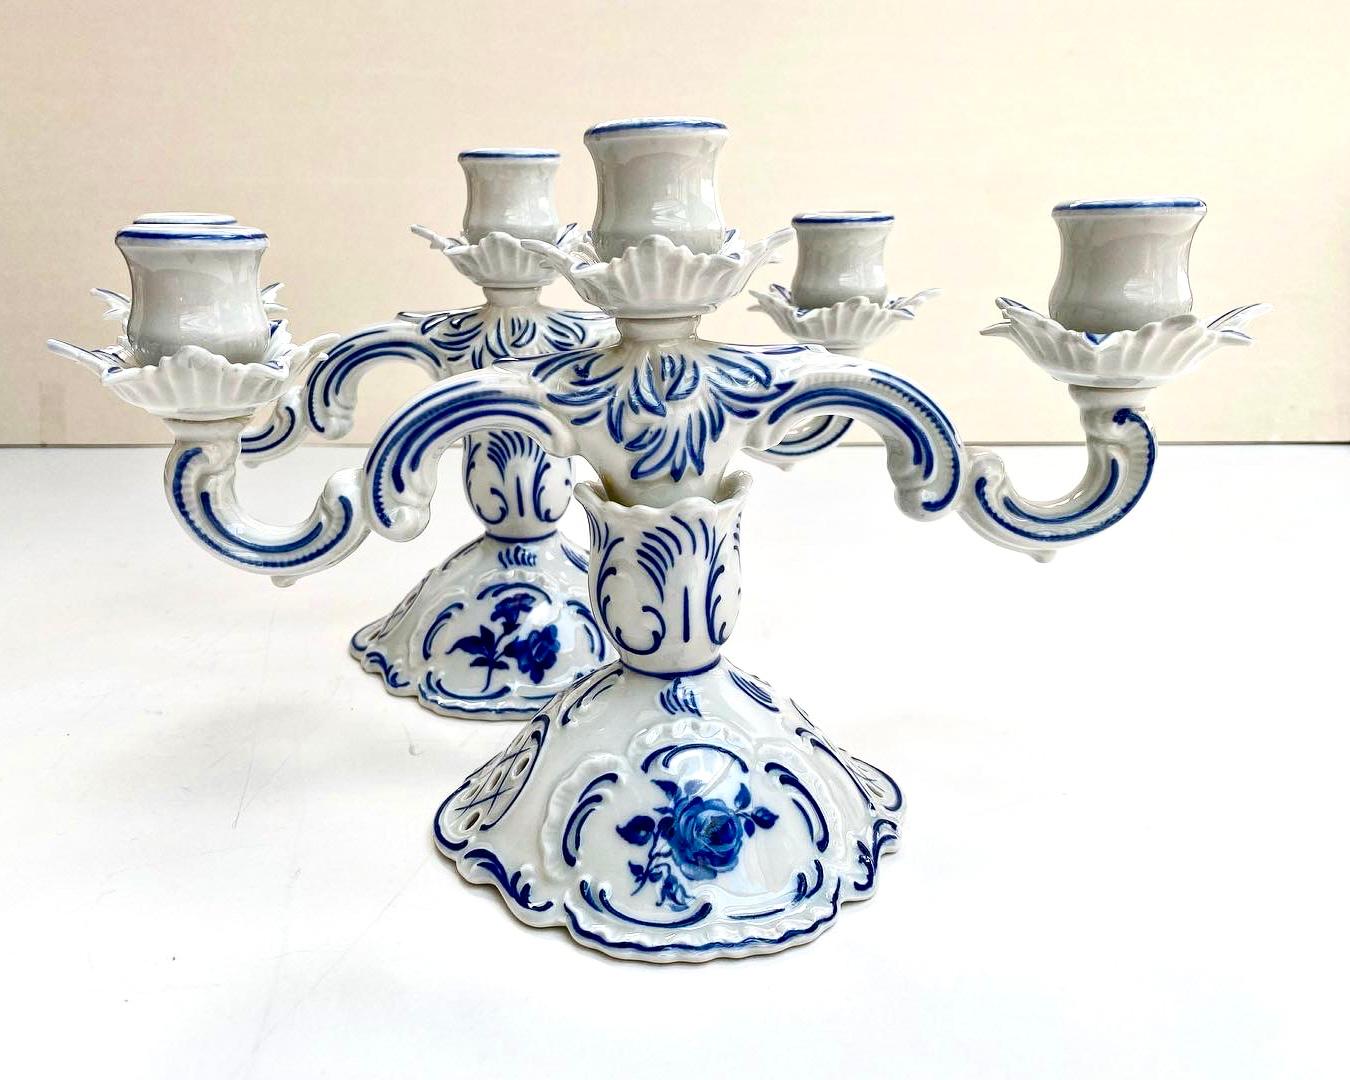 Luxurious antique paired candleholders, Dresden, Germany. First half of the 20th century.

Porcelain candlesticks are beautiful with their aesthetically pleasing shape, picturesque painting and coloring. 

The main theme of his painting is a